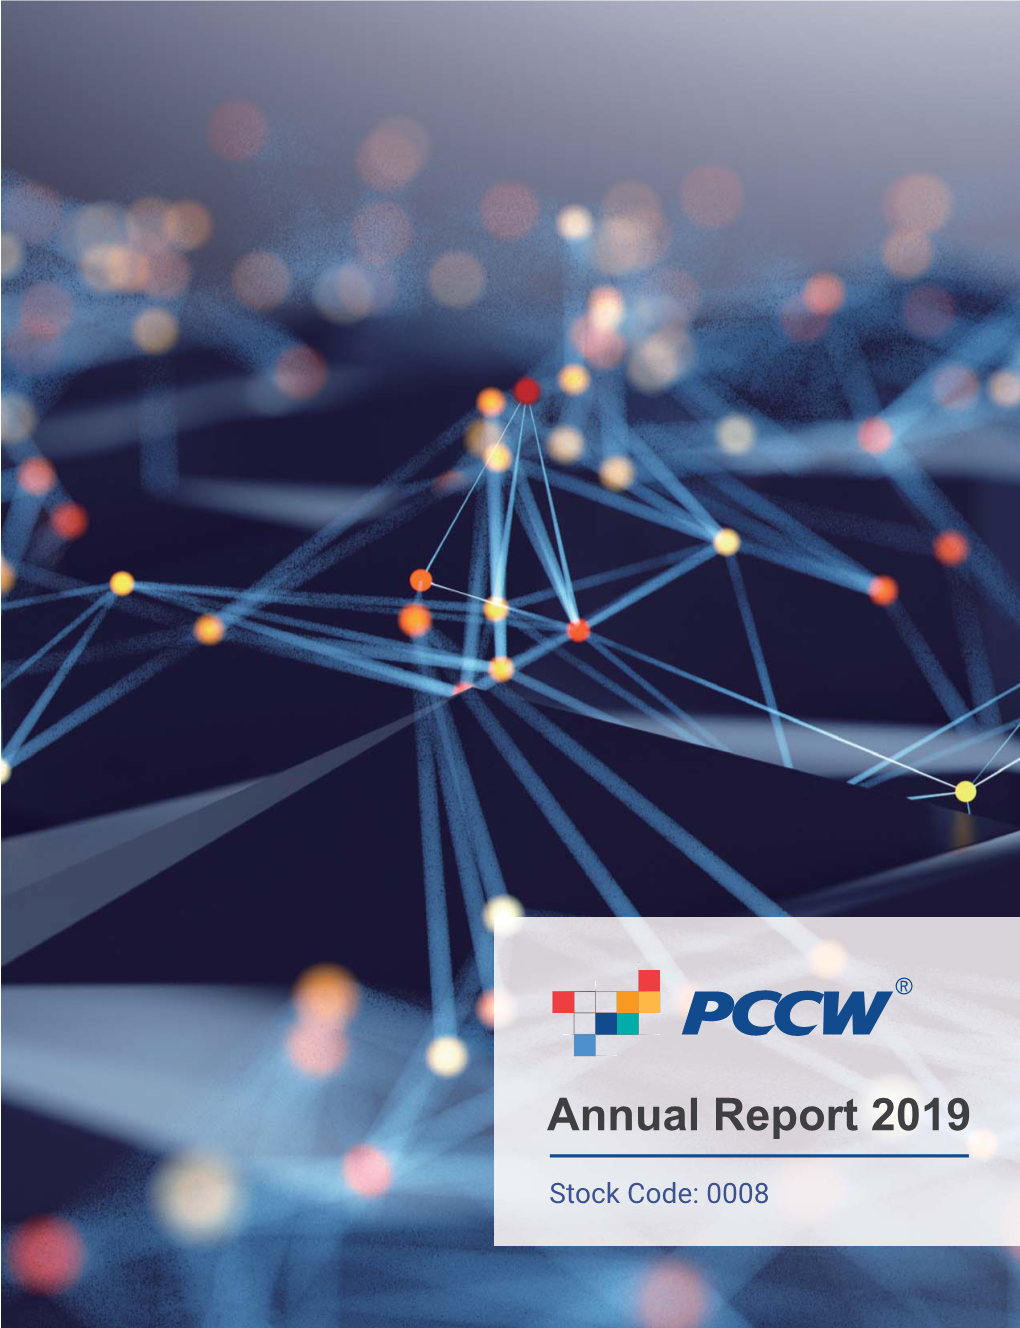 2019 Annual Report Other Than the Consolidated Financial Statements and Our Auditor’S Report Thereon